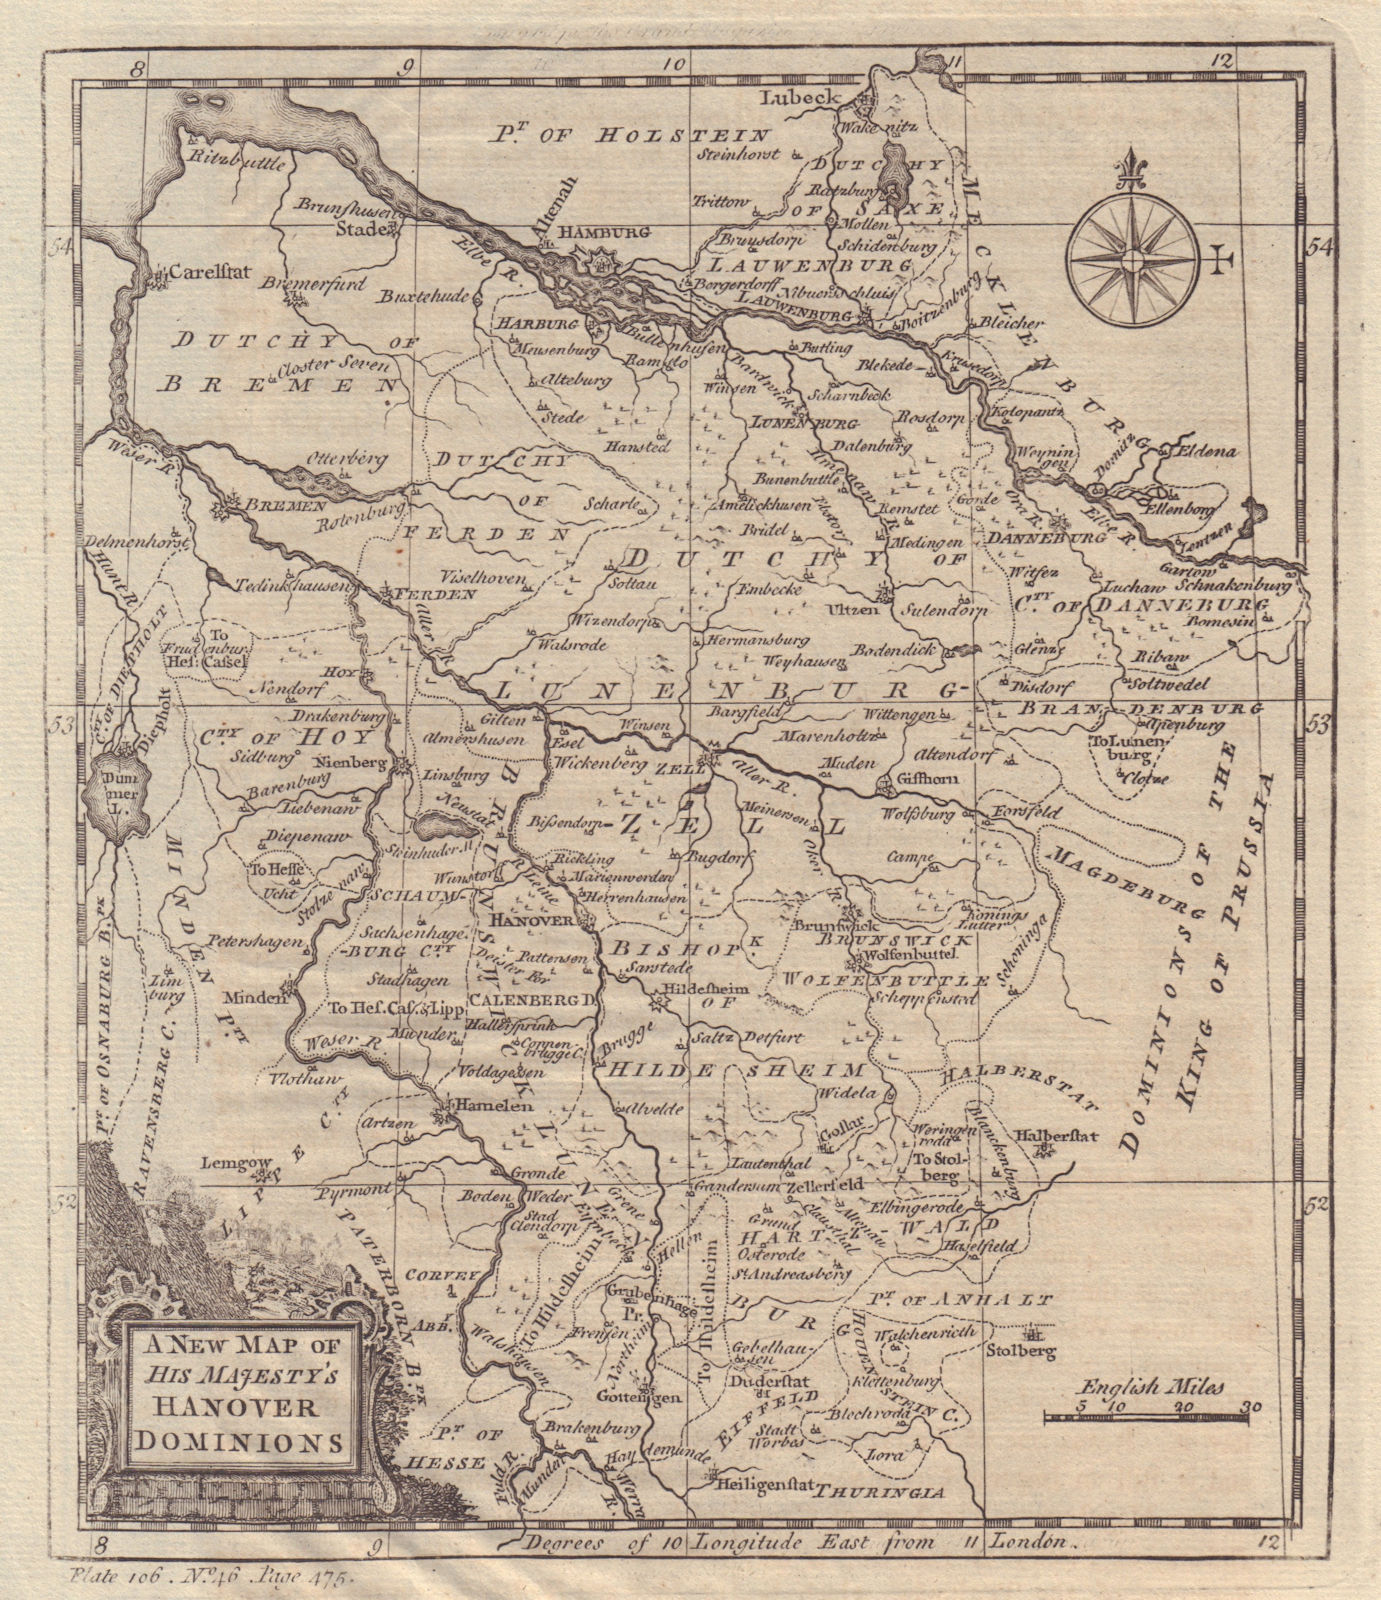 "A new Map of His Majesty's Hanover Dominions". Lower Saxony. KITCHIN 1752